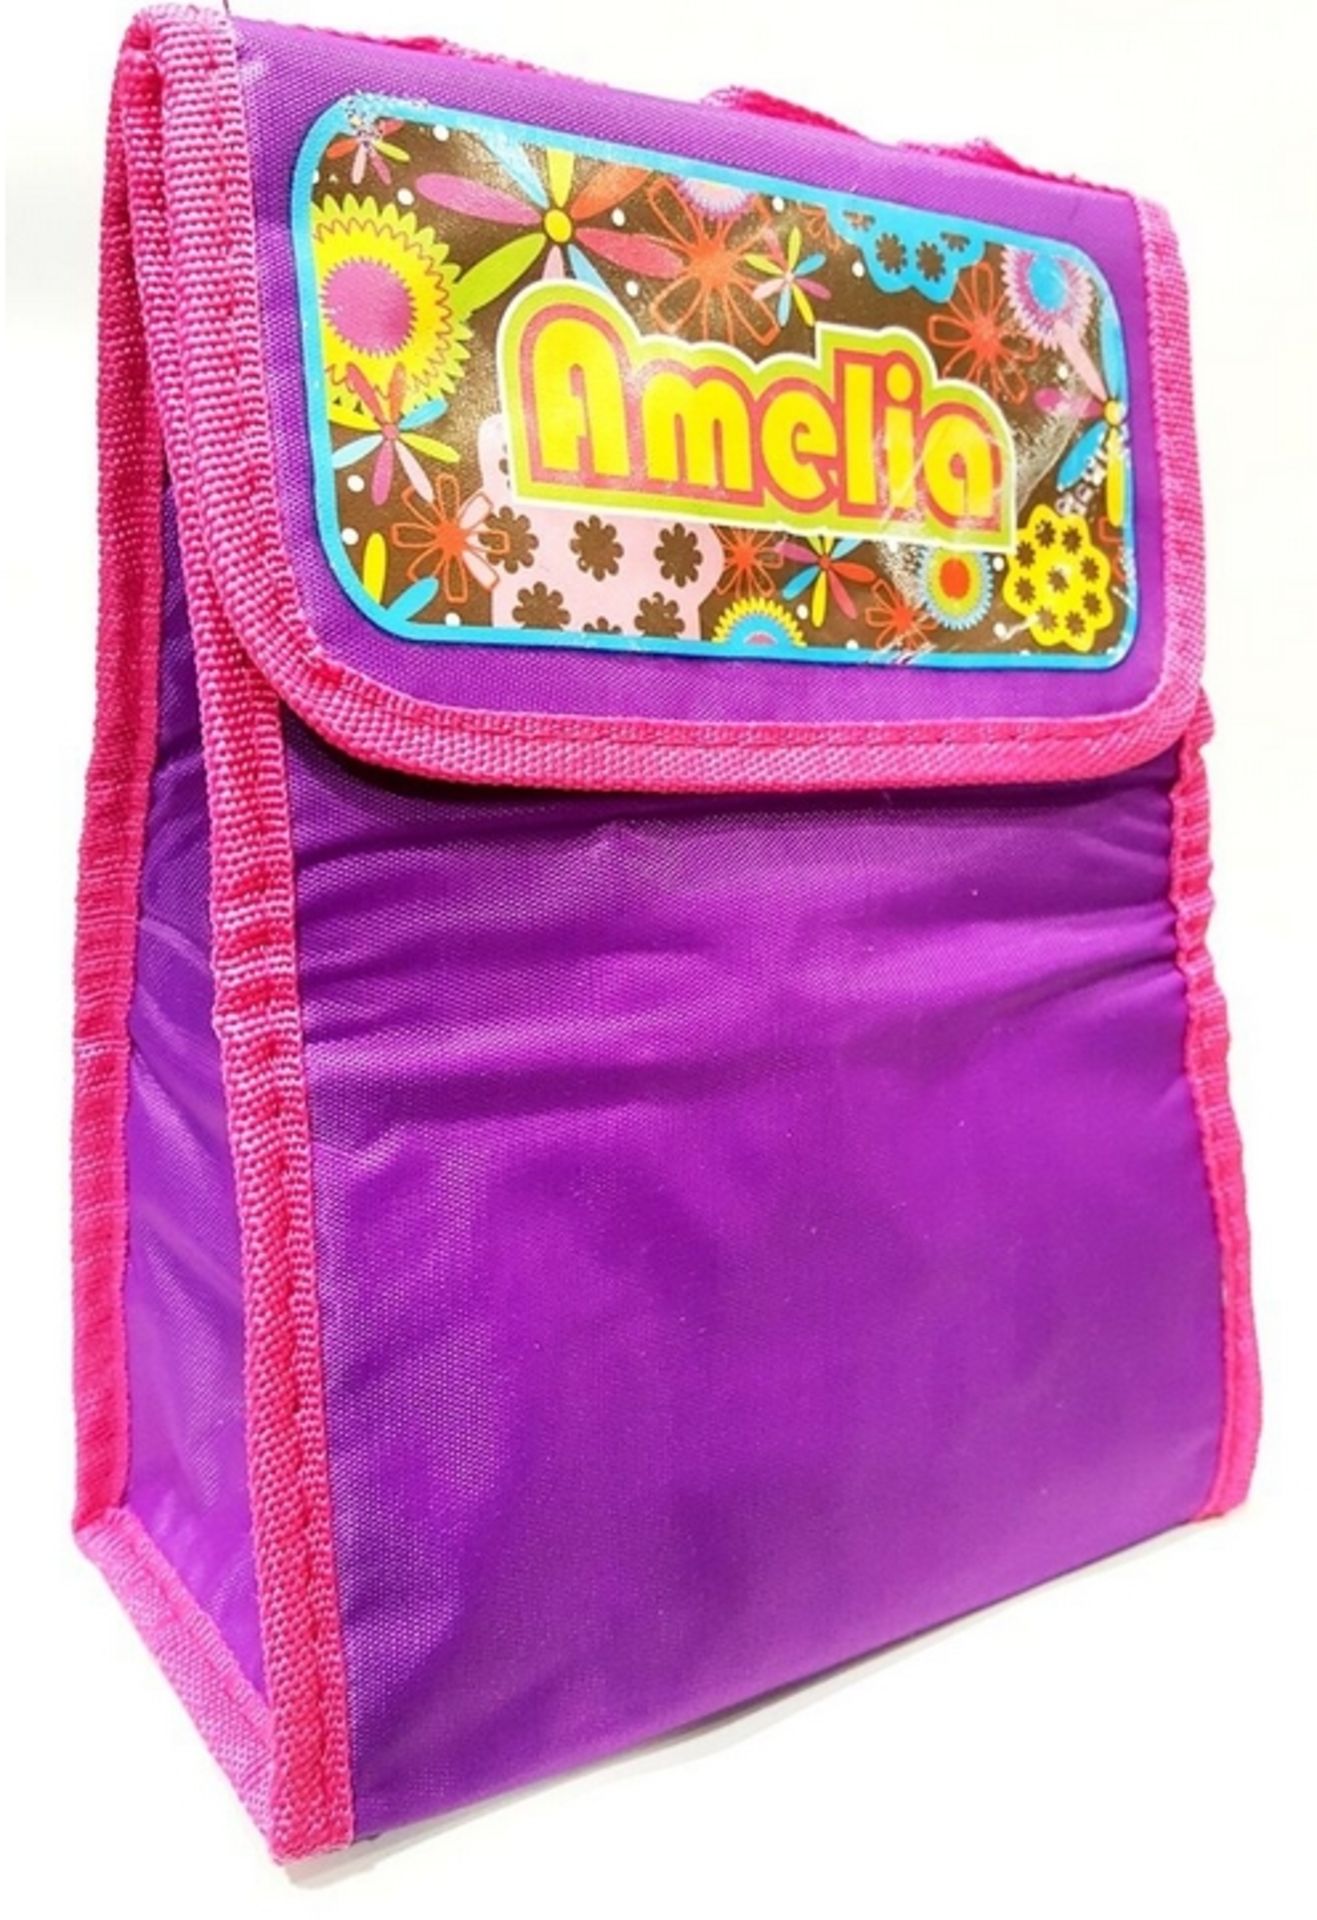 children's lunch bags insulated lunch bags. - Image 4 of 4